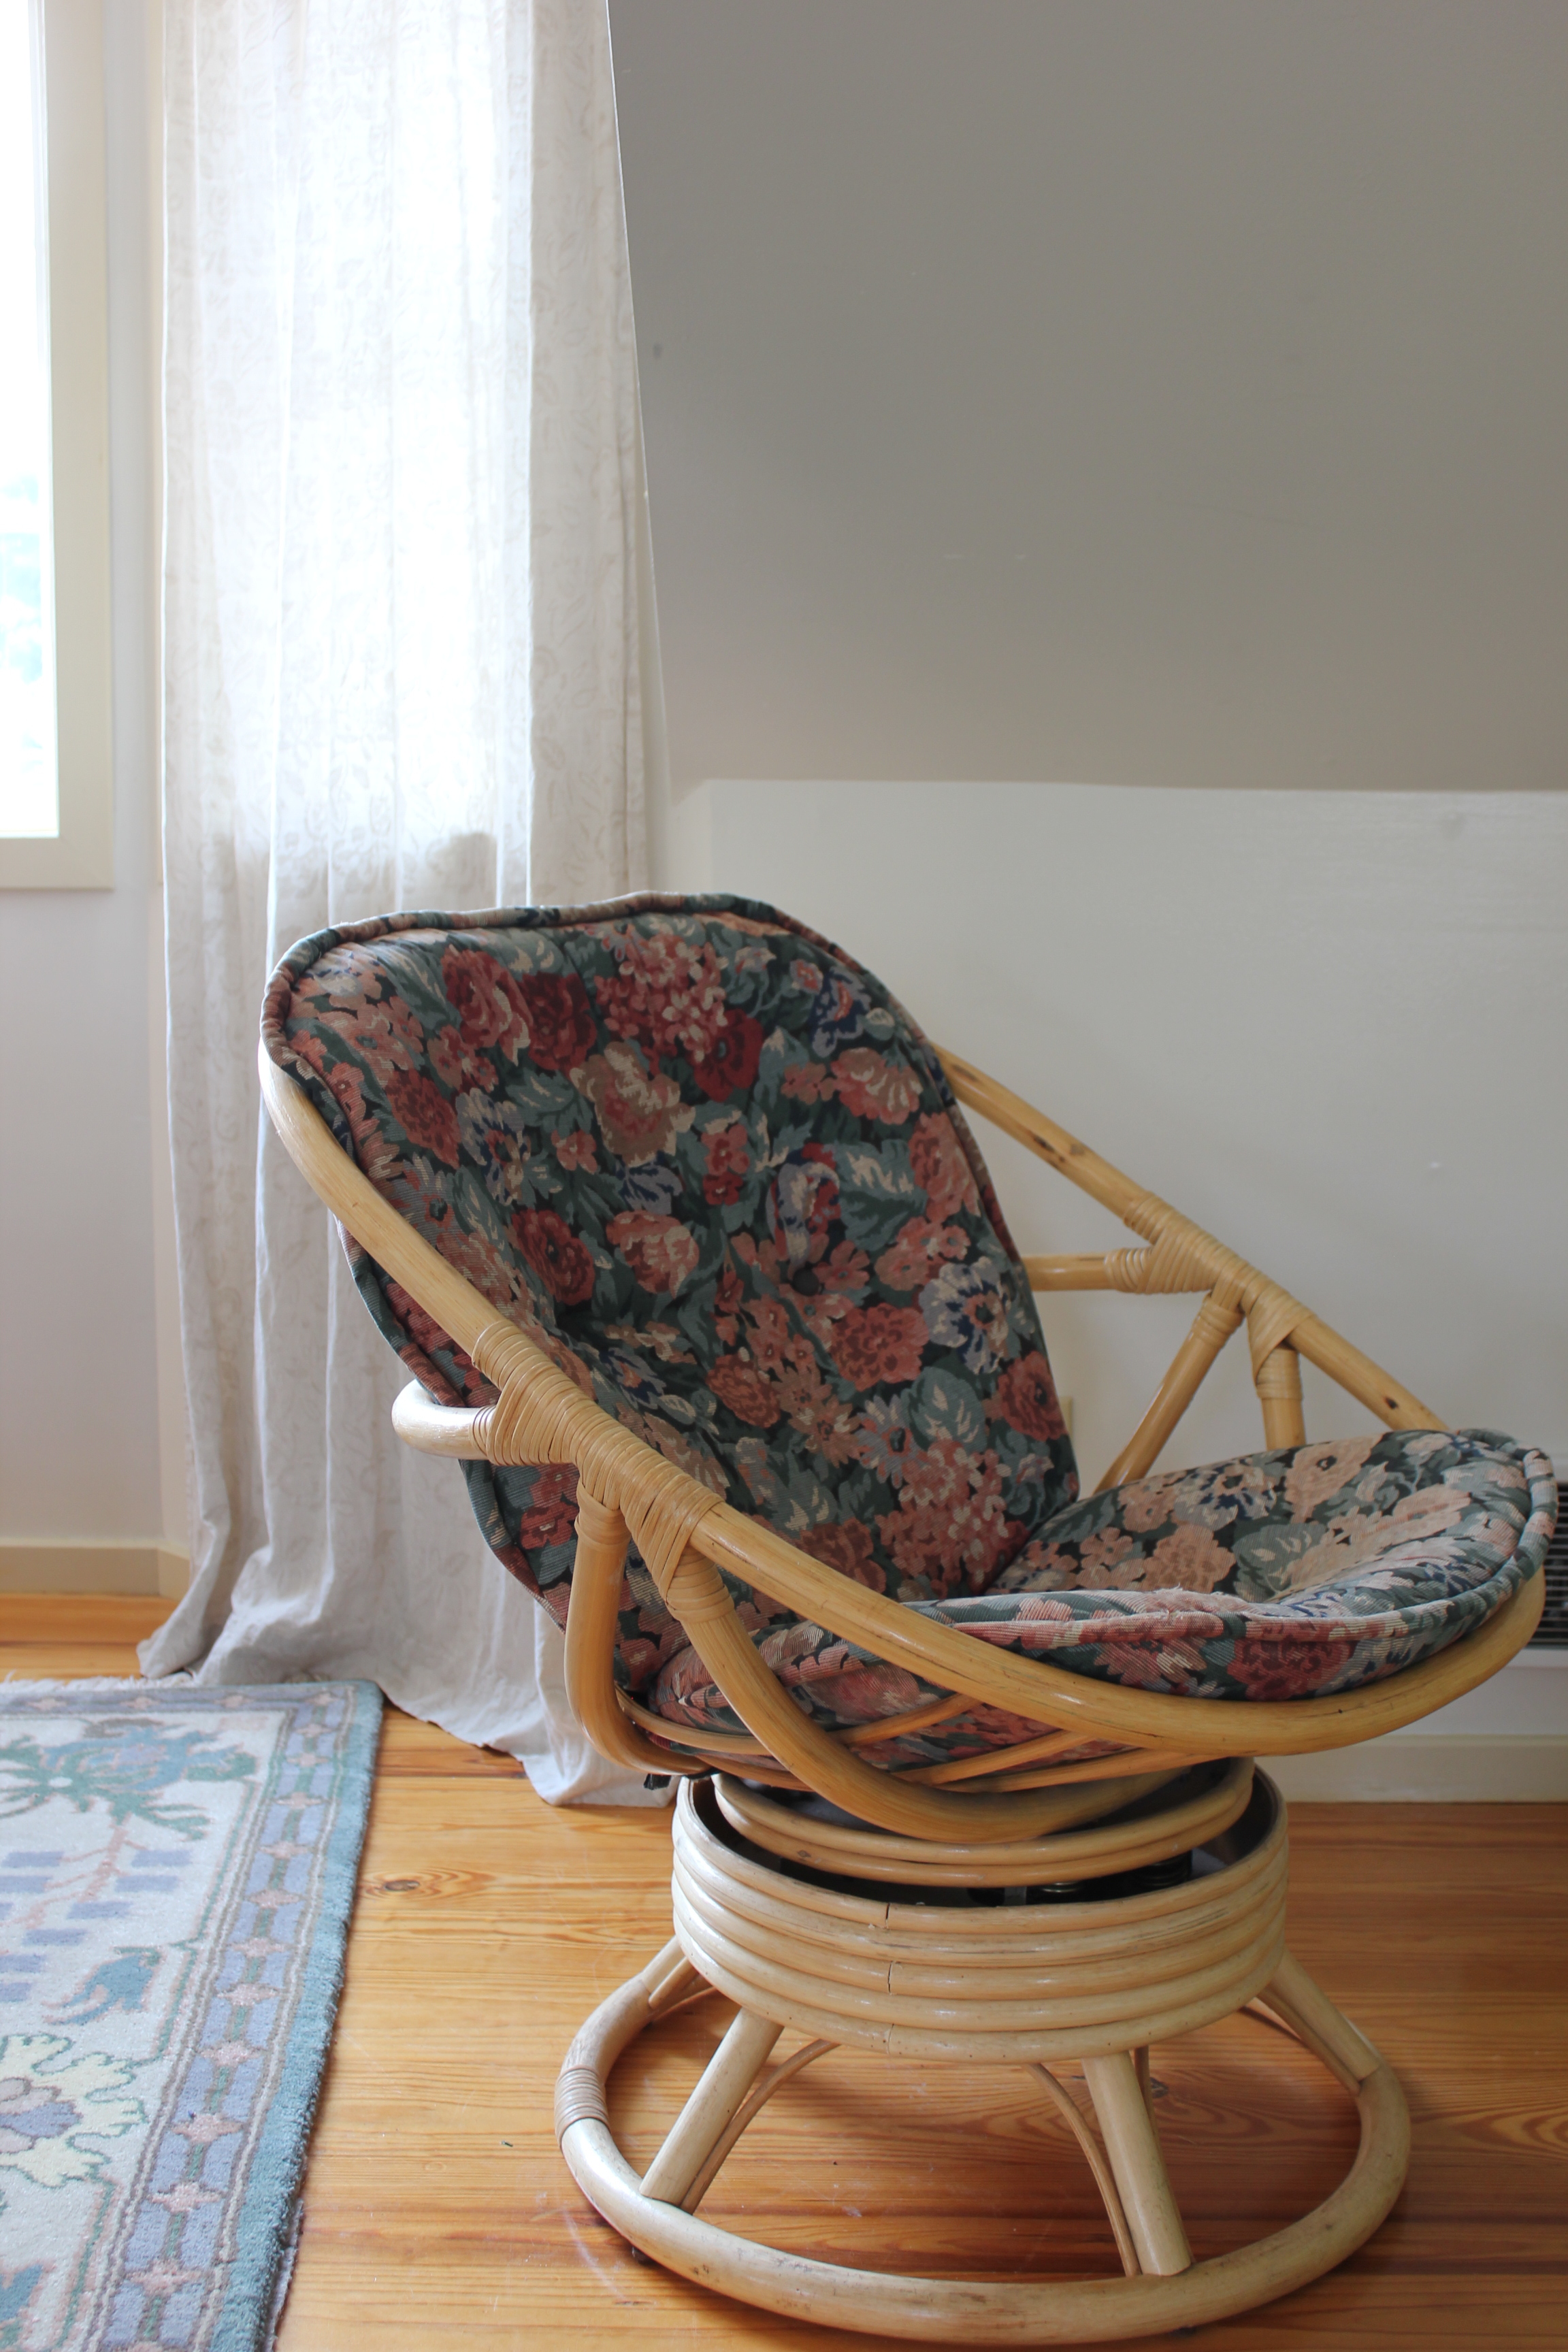 vintage rattan and floral rocking chair at plum nelli farm chic apartment rental airbnb.JPG